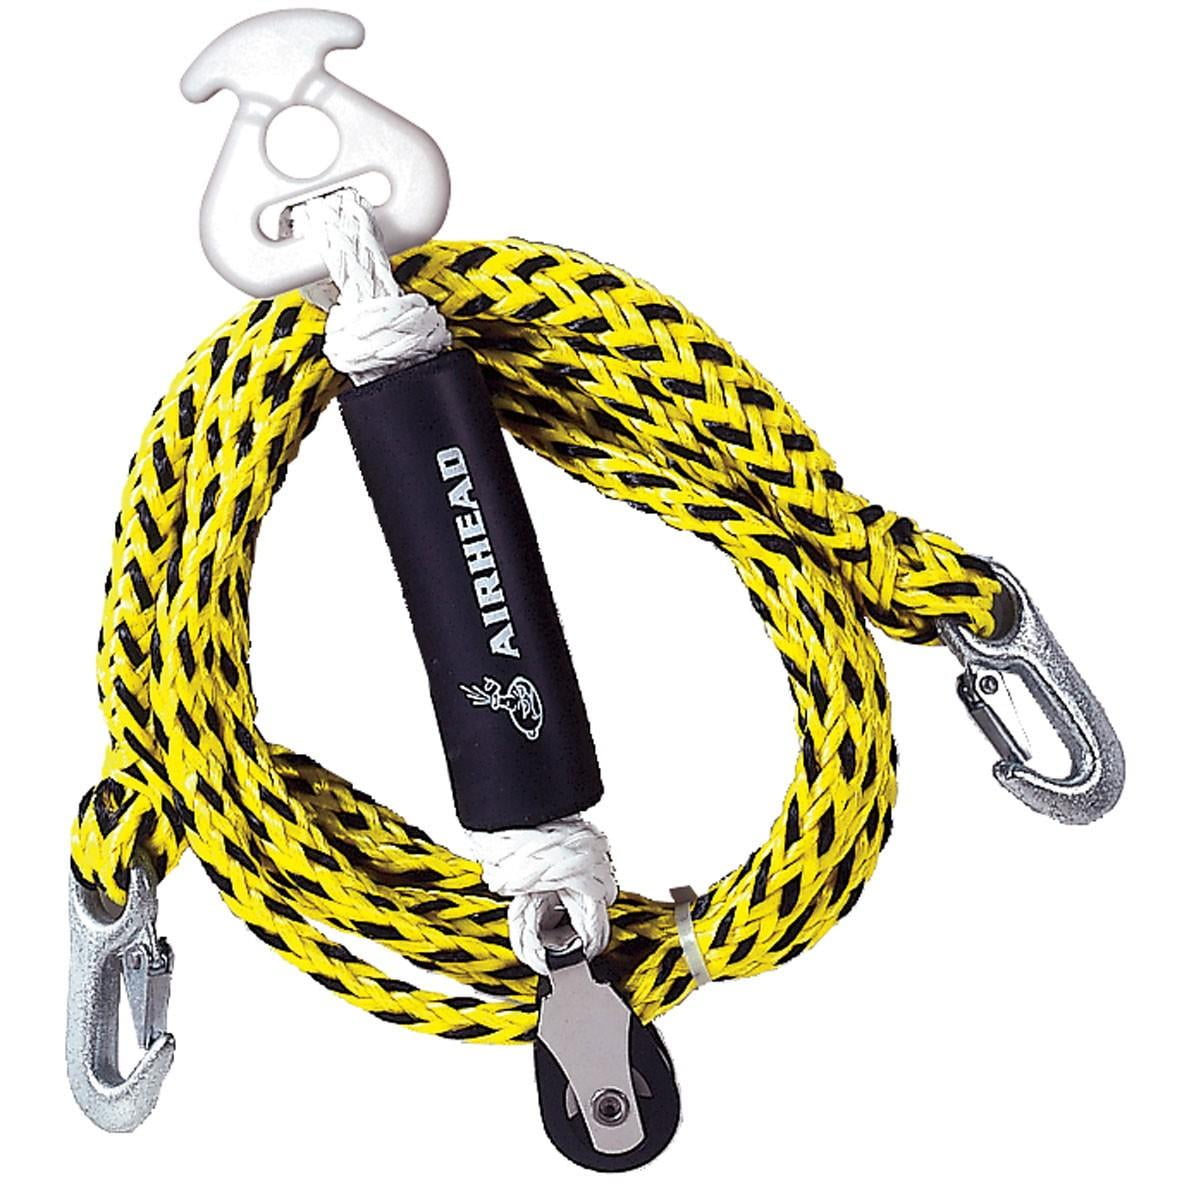 Proline 6' Tow Harness Rope with 3 stainless clips,great for Tubes Water Skis. 